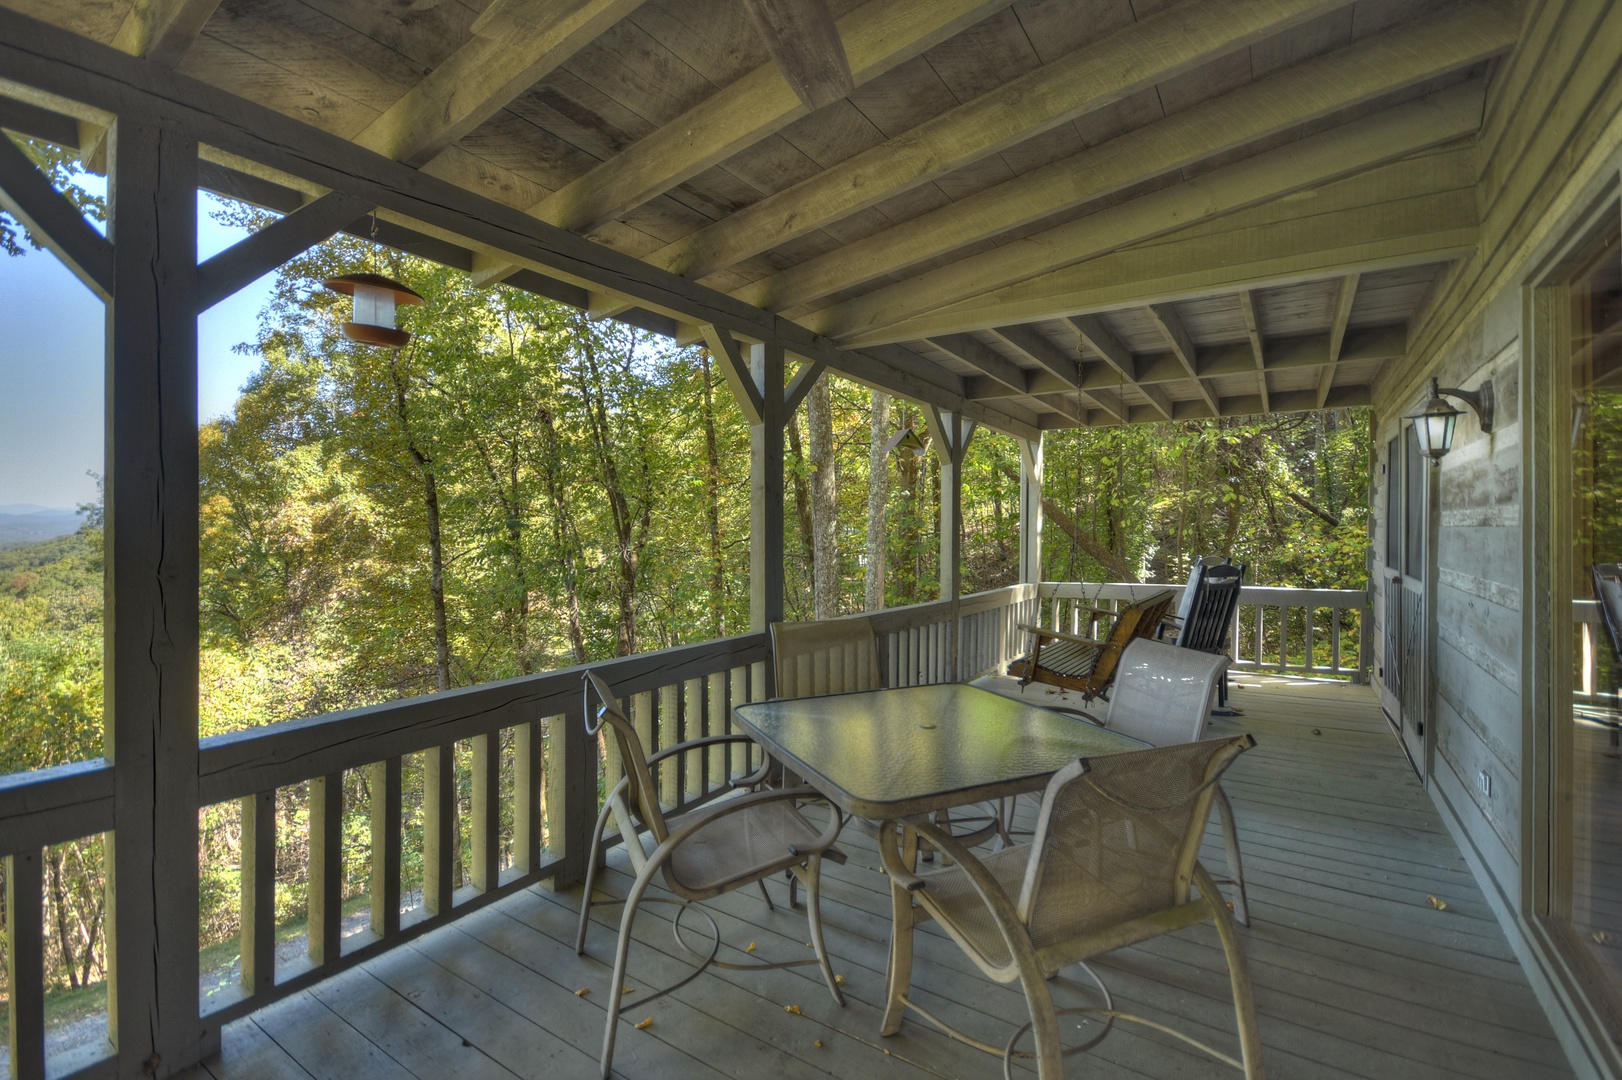 Ridgetop Pointaview- Entry level deck area with outdoor table and chairs